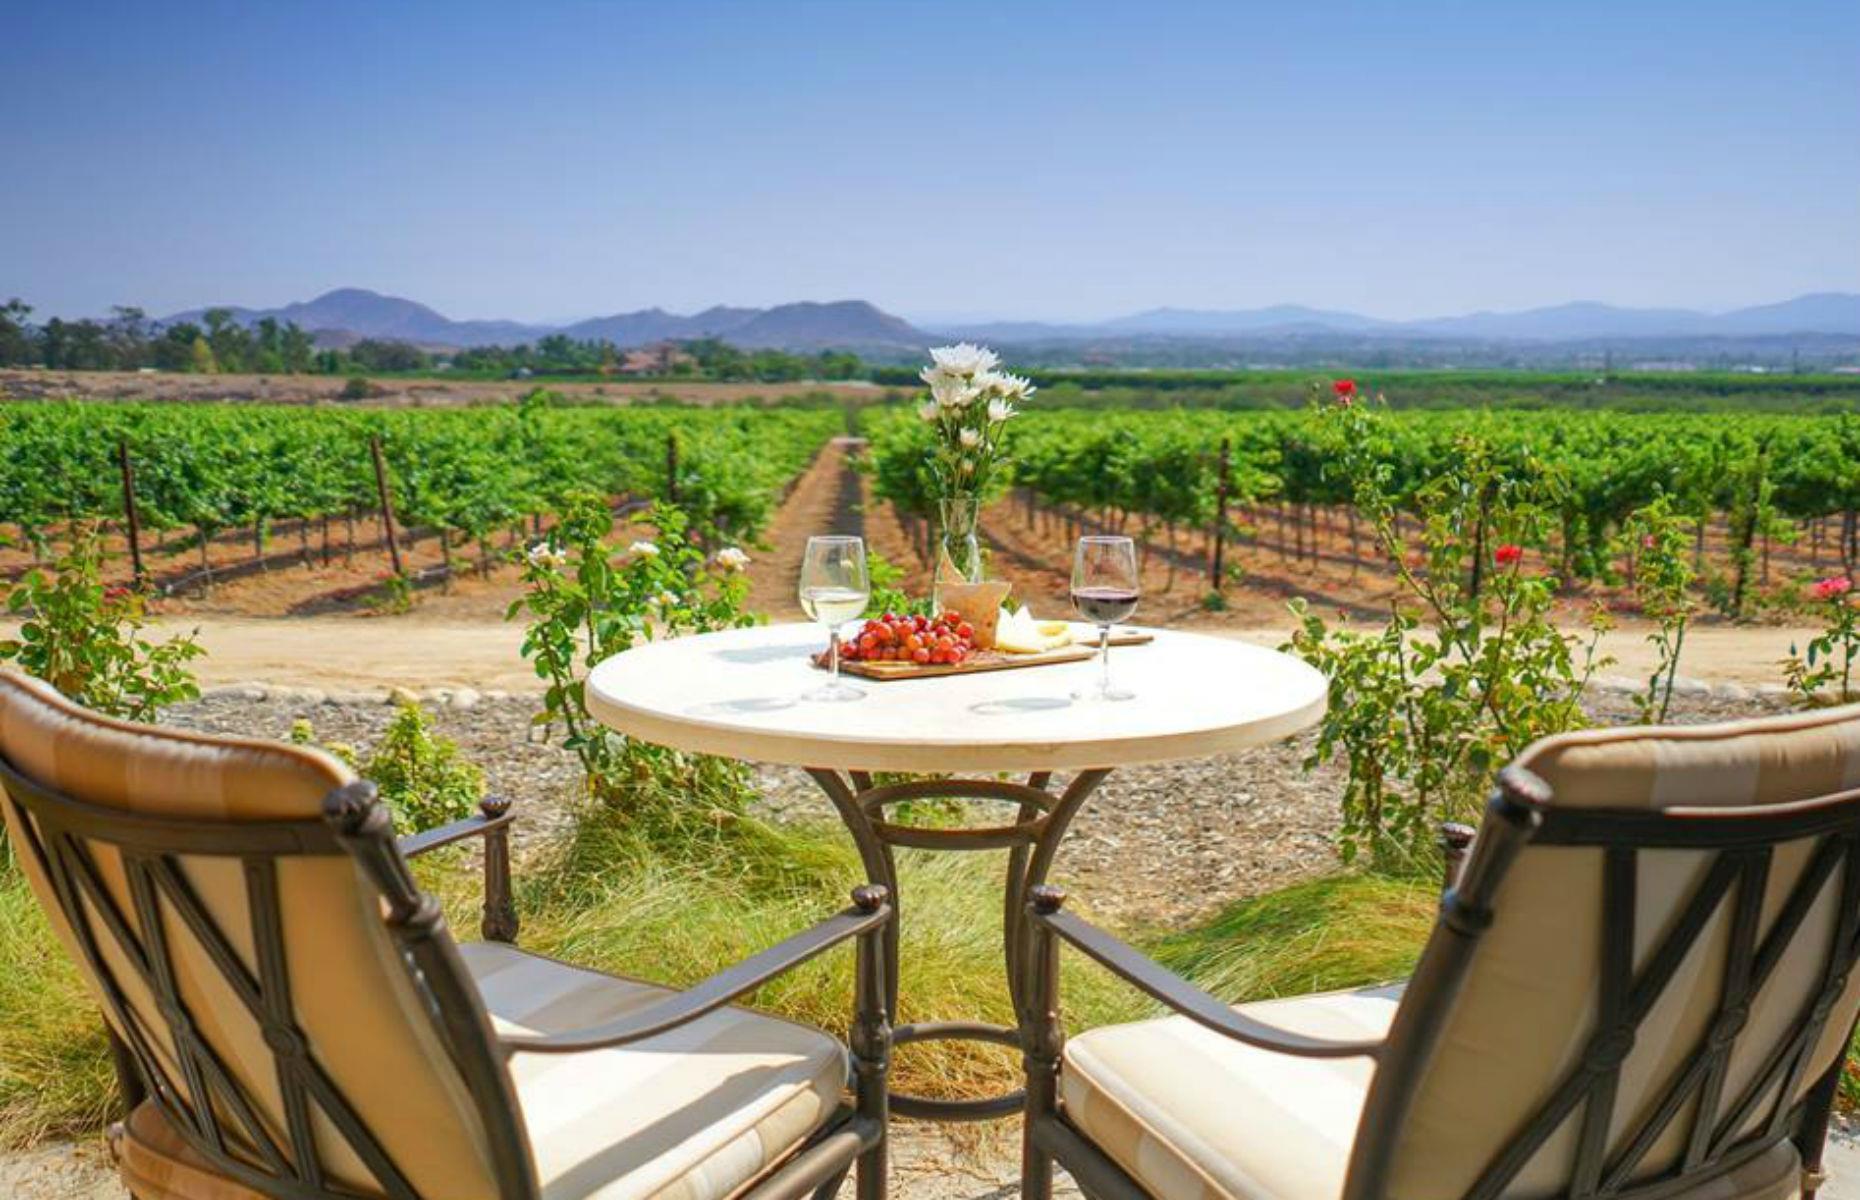 <p>For a good dose of glitz and glamour, check out California’s Temecula Valley. It’s been likened to Vegas, thanks to its wealth of casinos and upscale hotels, yet has the subtle luxury you’d associate with Napa. At <a href="https://www.carterestatewinery.com/">Carter Estate</a>, you’ll find Champagne-method bubbles, poured in the sleek tasting room and paired with canapés prepared with ingredients from the kitchen garden. To soak it all up, stay the night in a suite overlooking vines planted with Malbec, Chardonnay and Pinot Noir.</p>